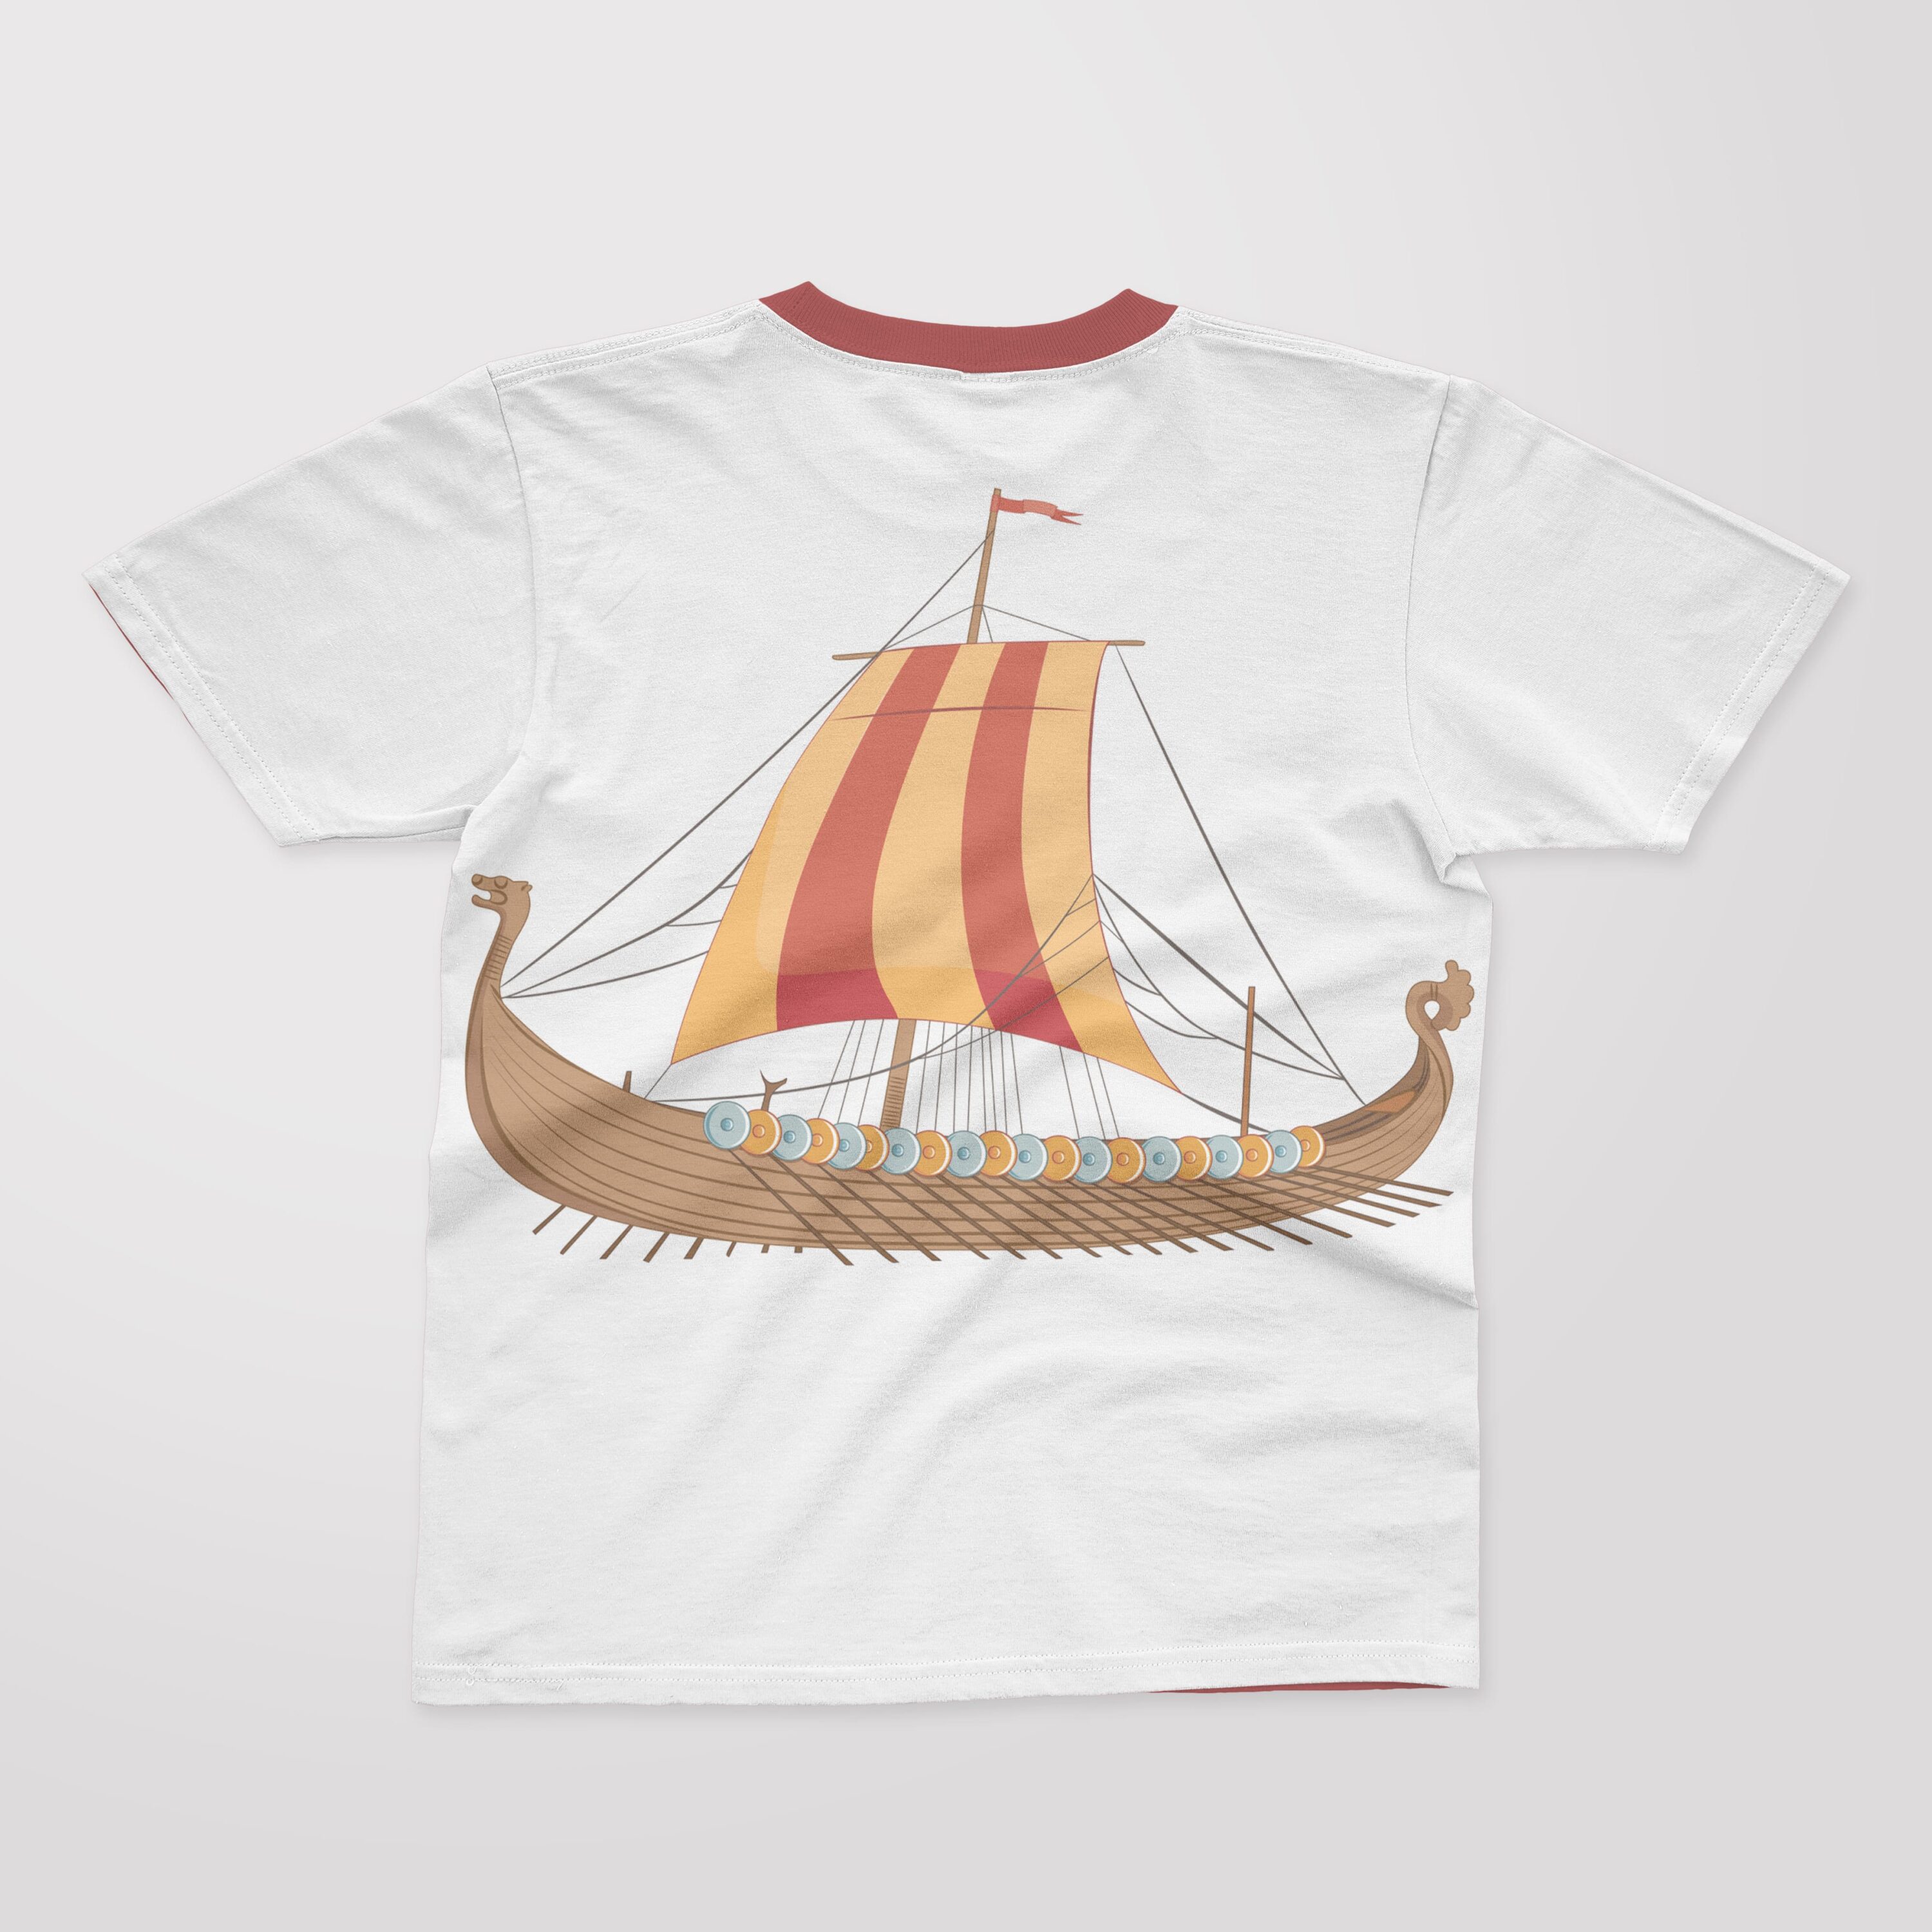 Viking ship for your t-shirt.